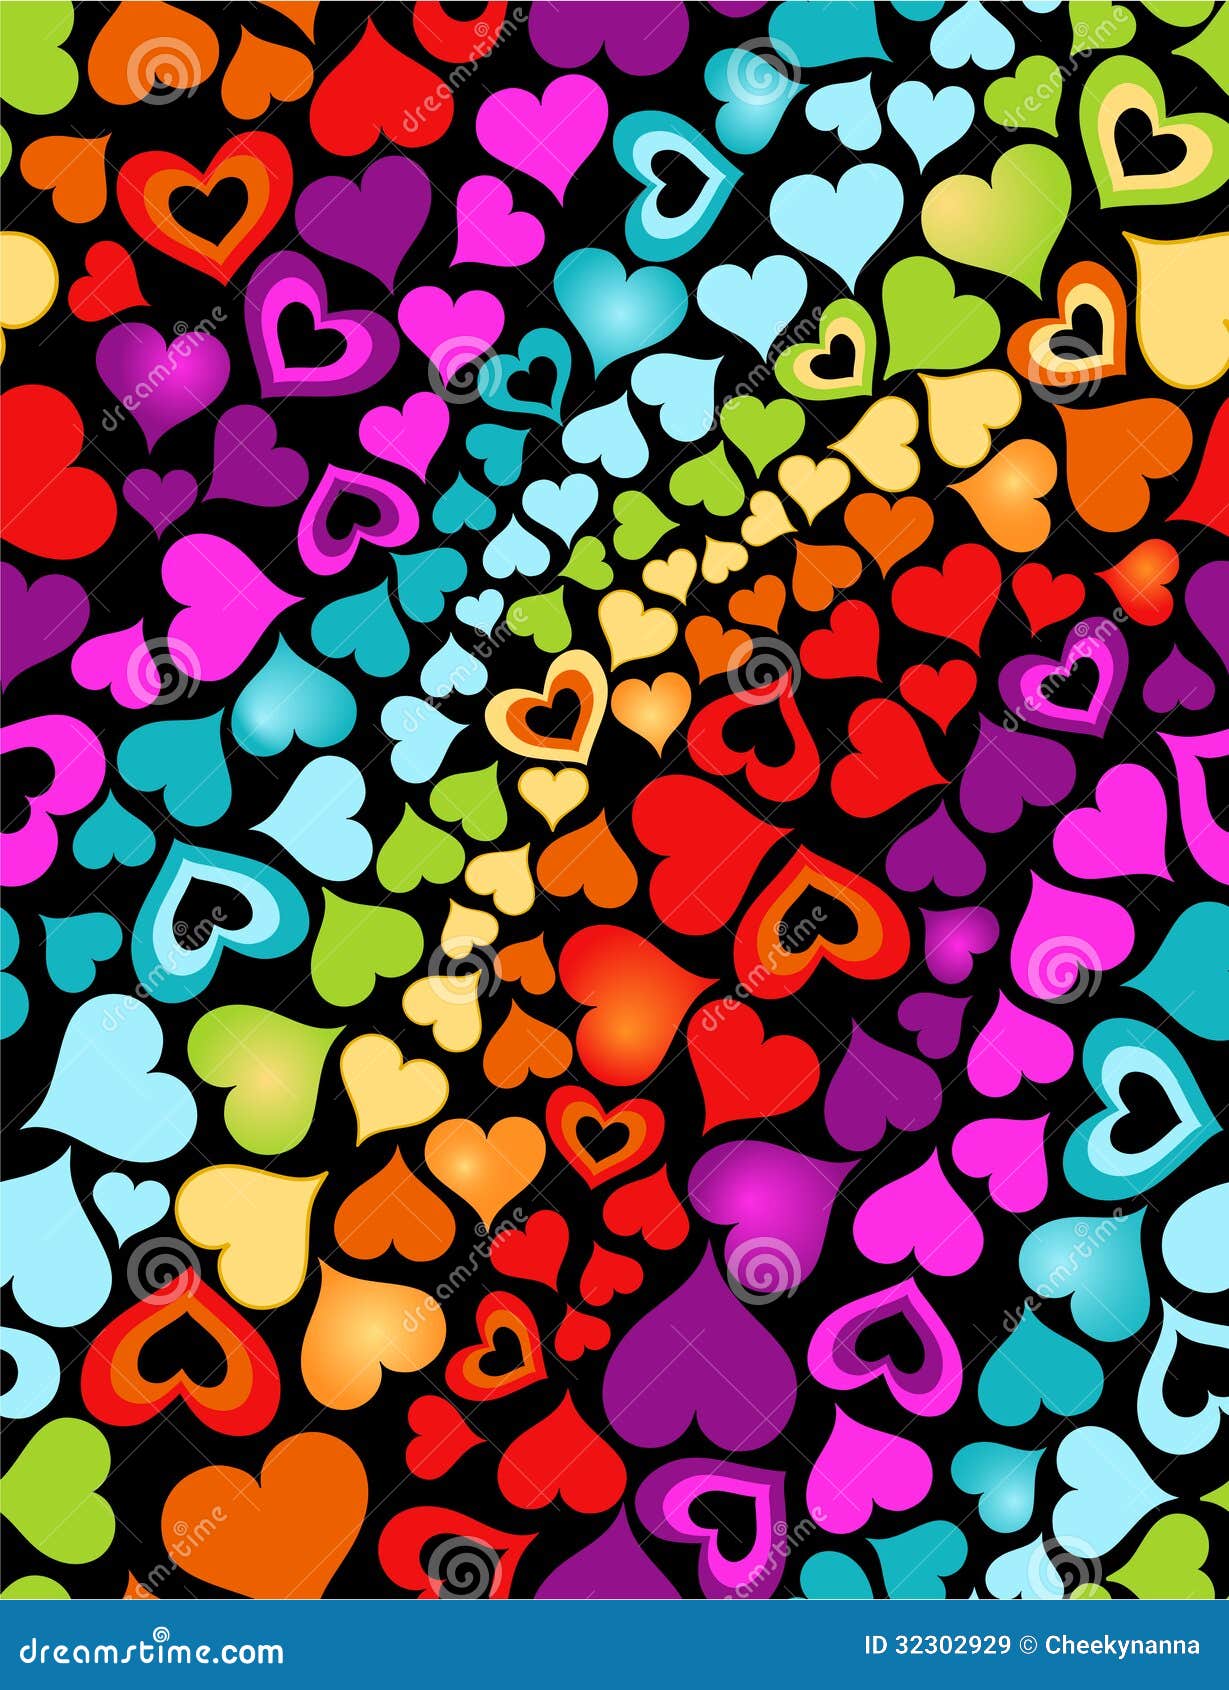 Like rainbows and hearts You may also like these Dynamic Wallpapers for  jailbroken devices